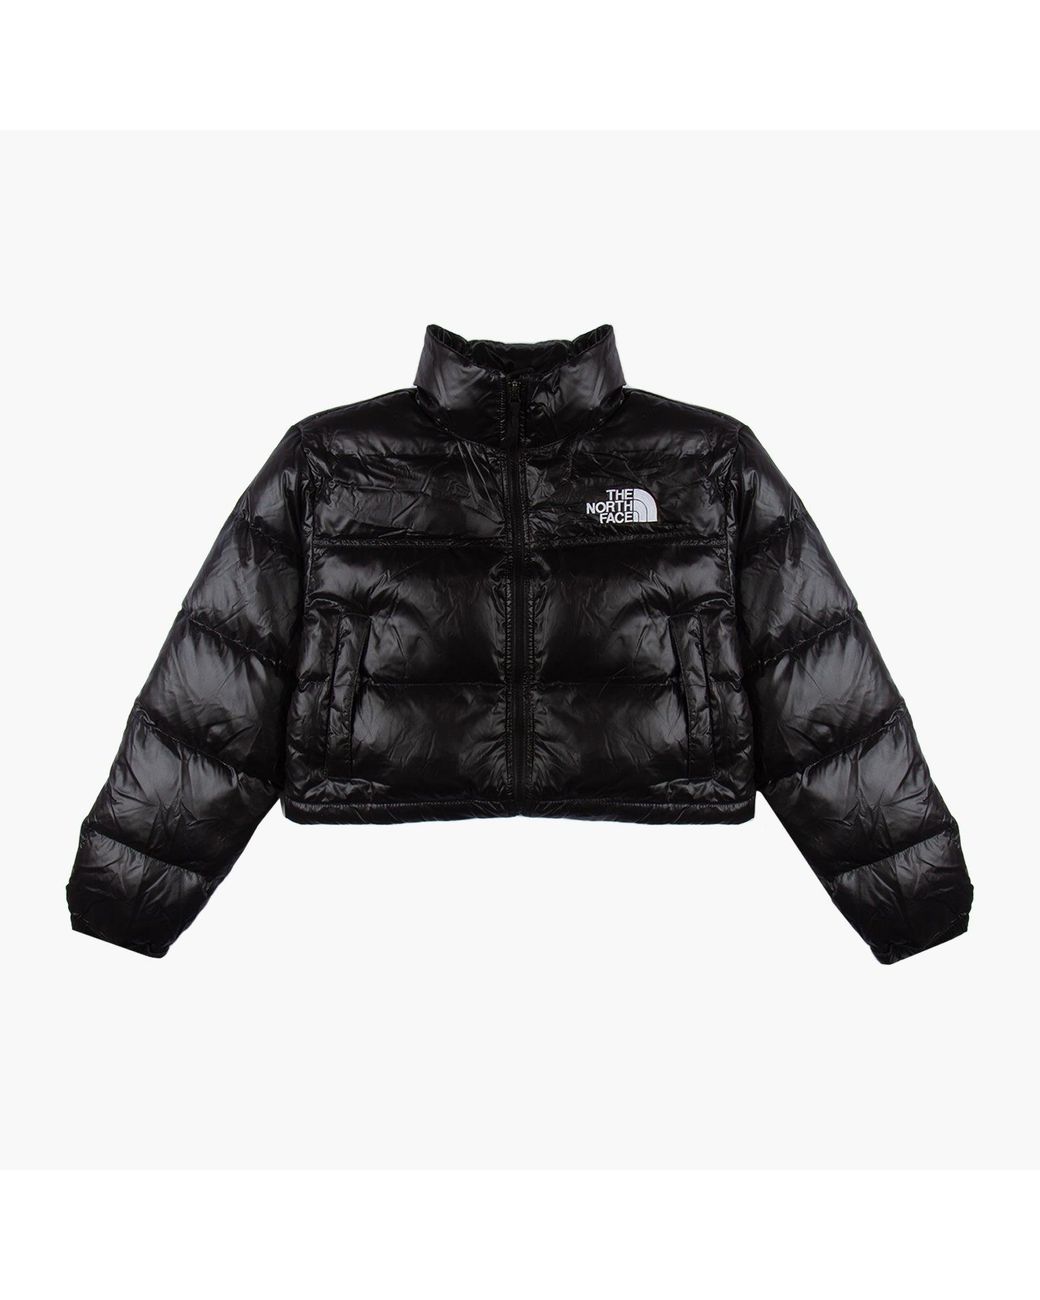 The North Face The Nuptse Short Jacket in Black | Lyst